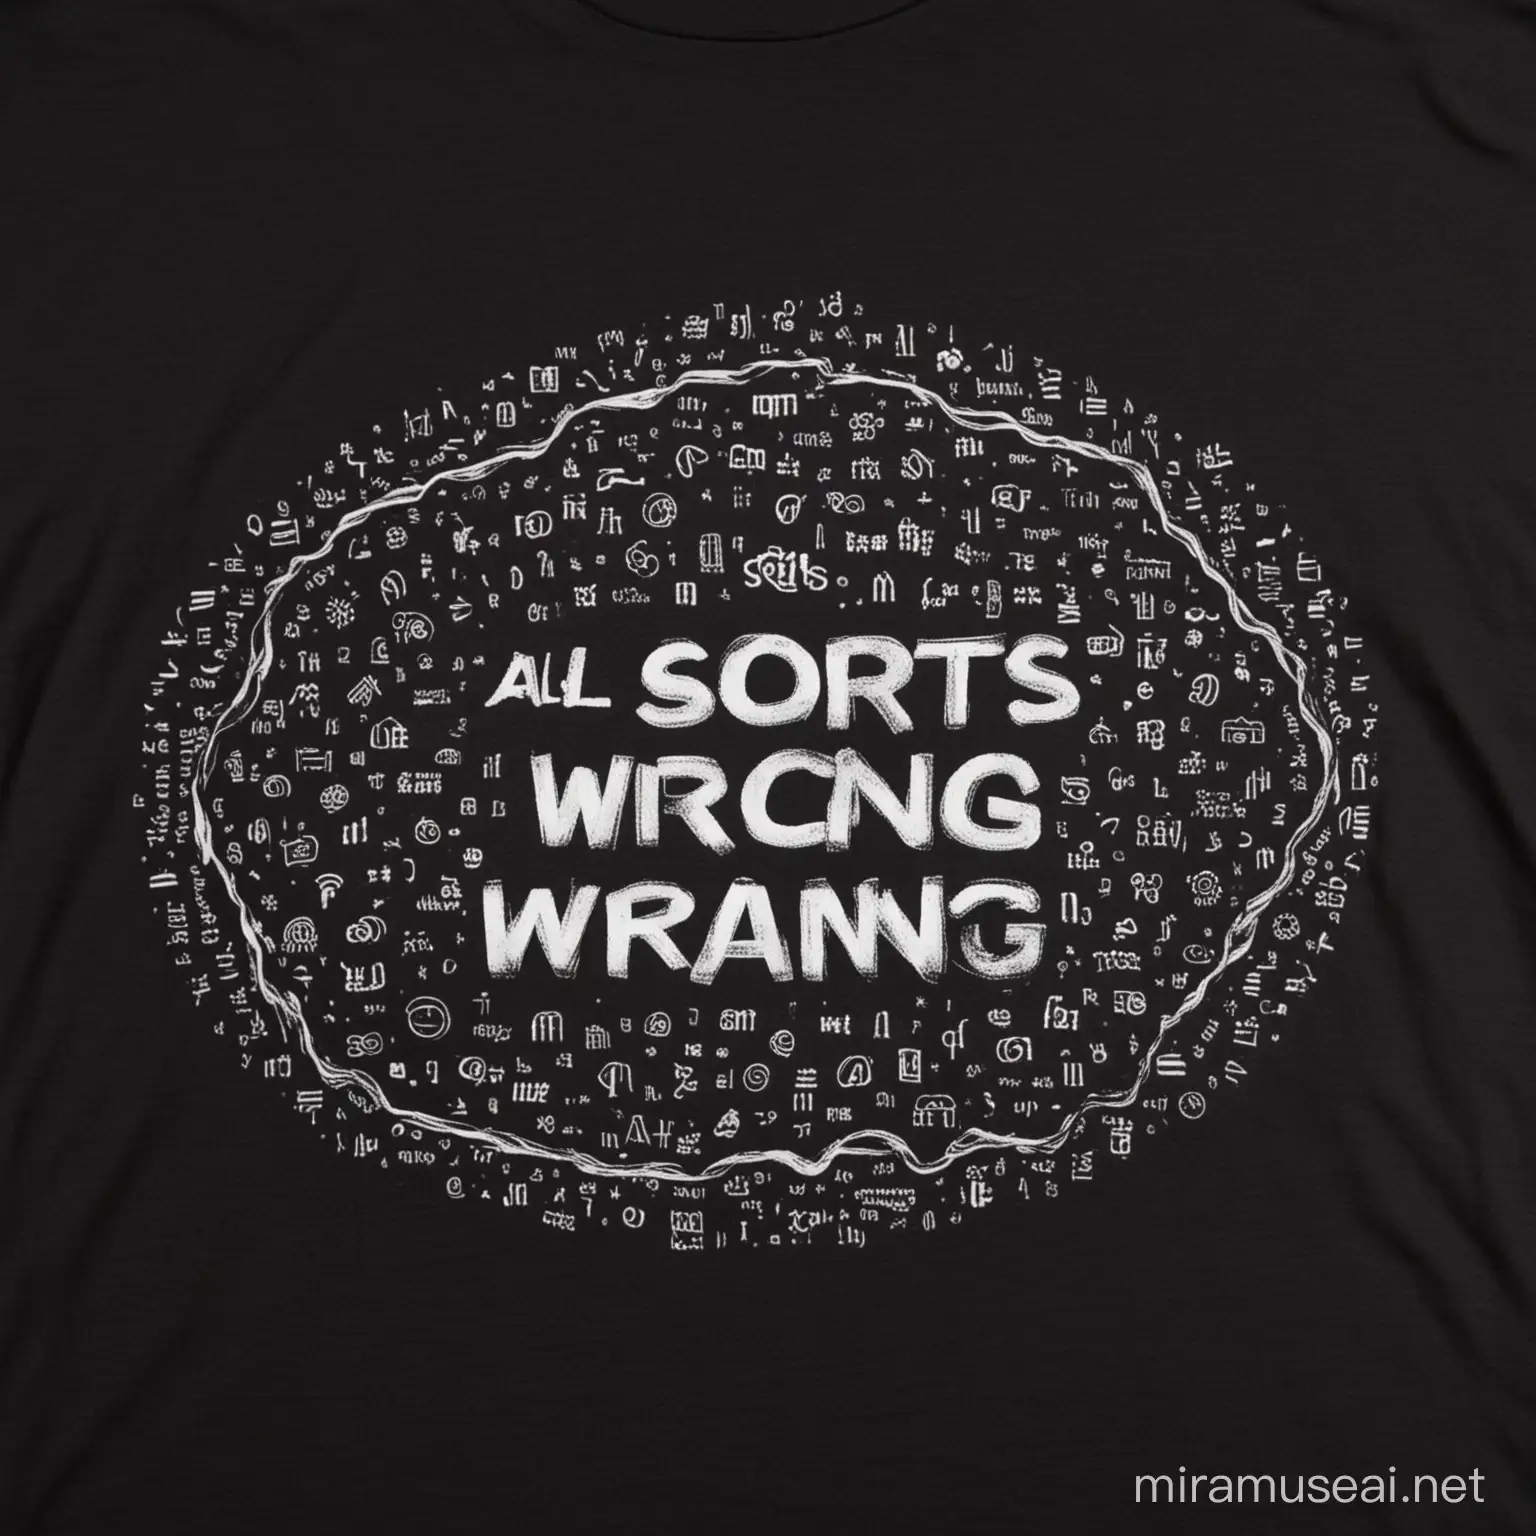 a black t-shirt with the words "all sorts of wrong" in the center across the breast area with an image below illustrating that saying
